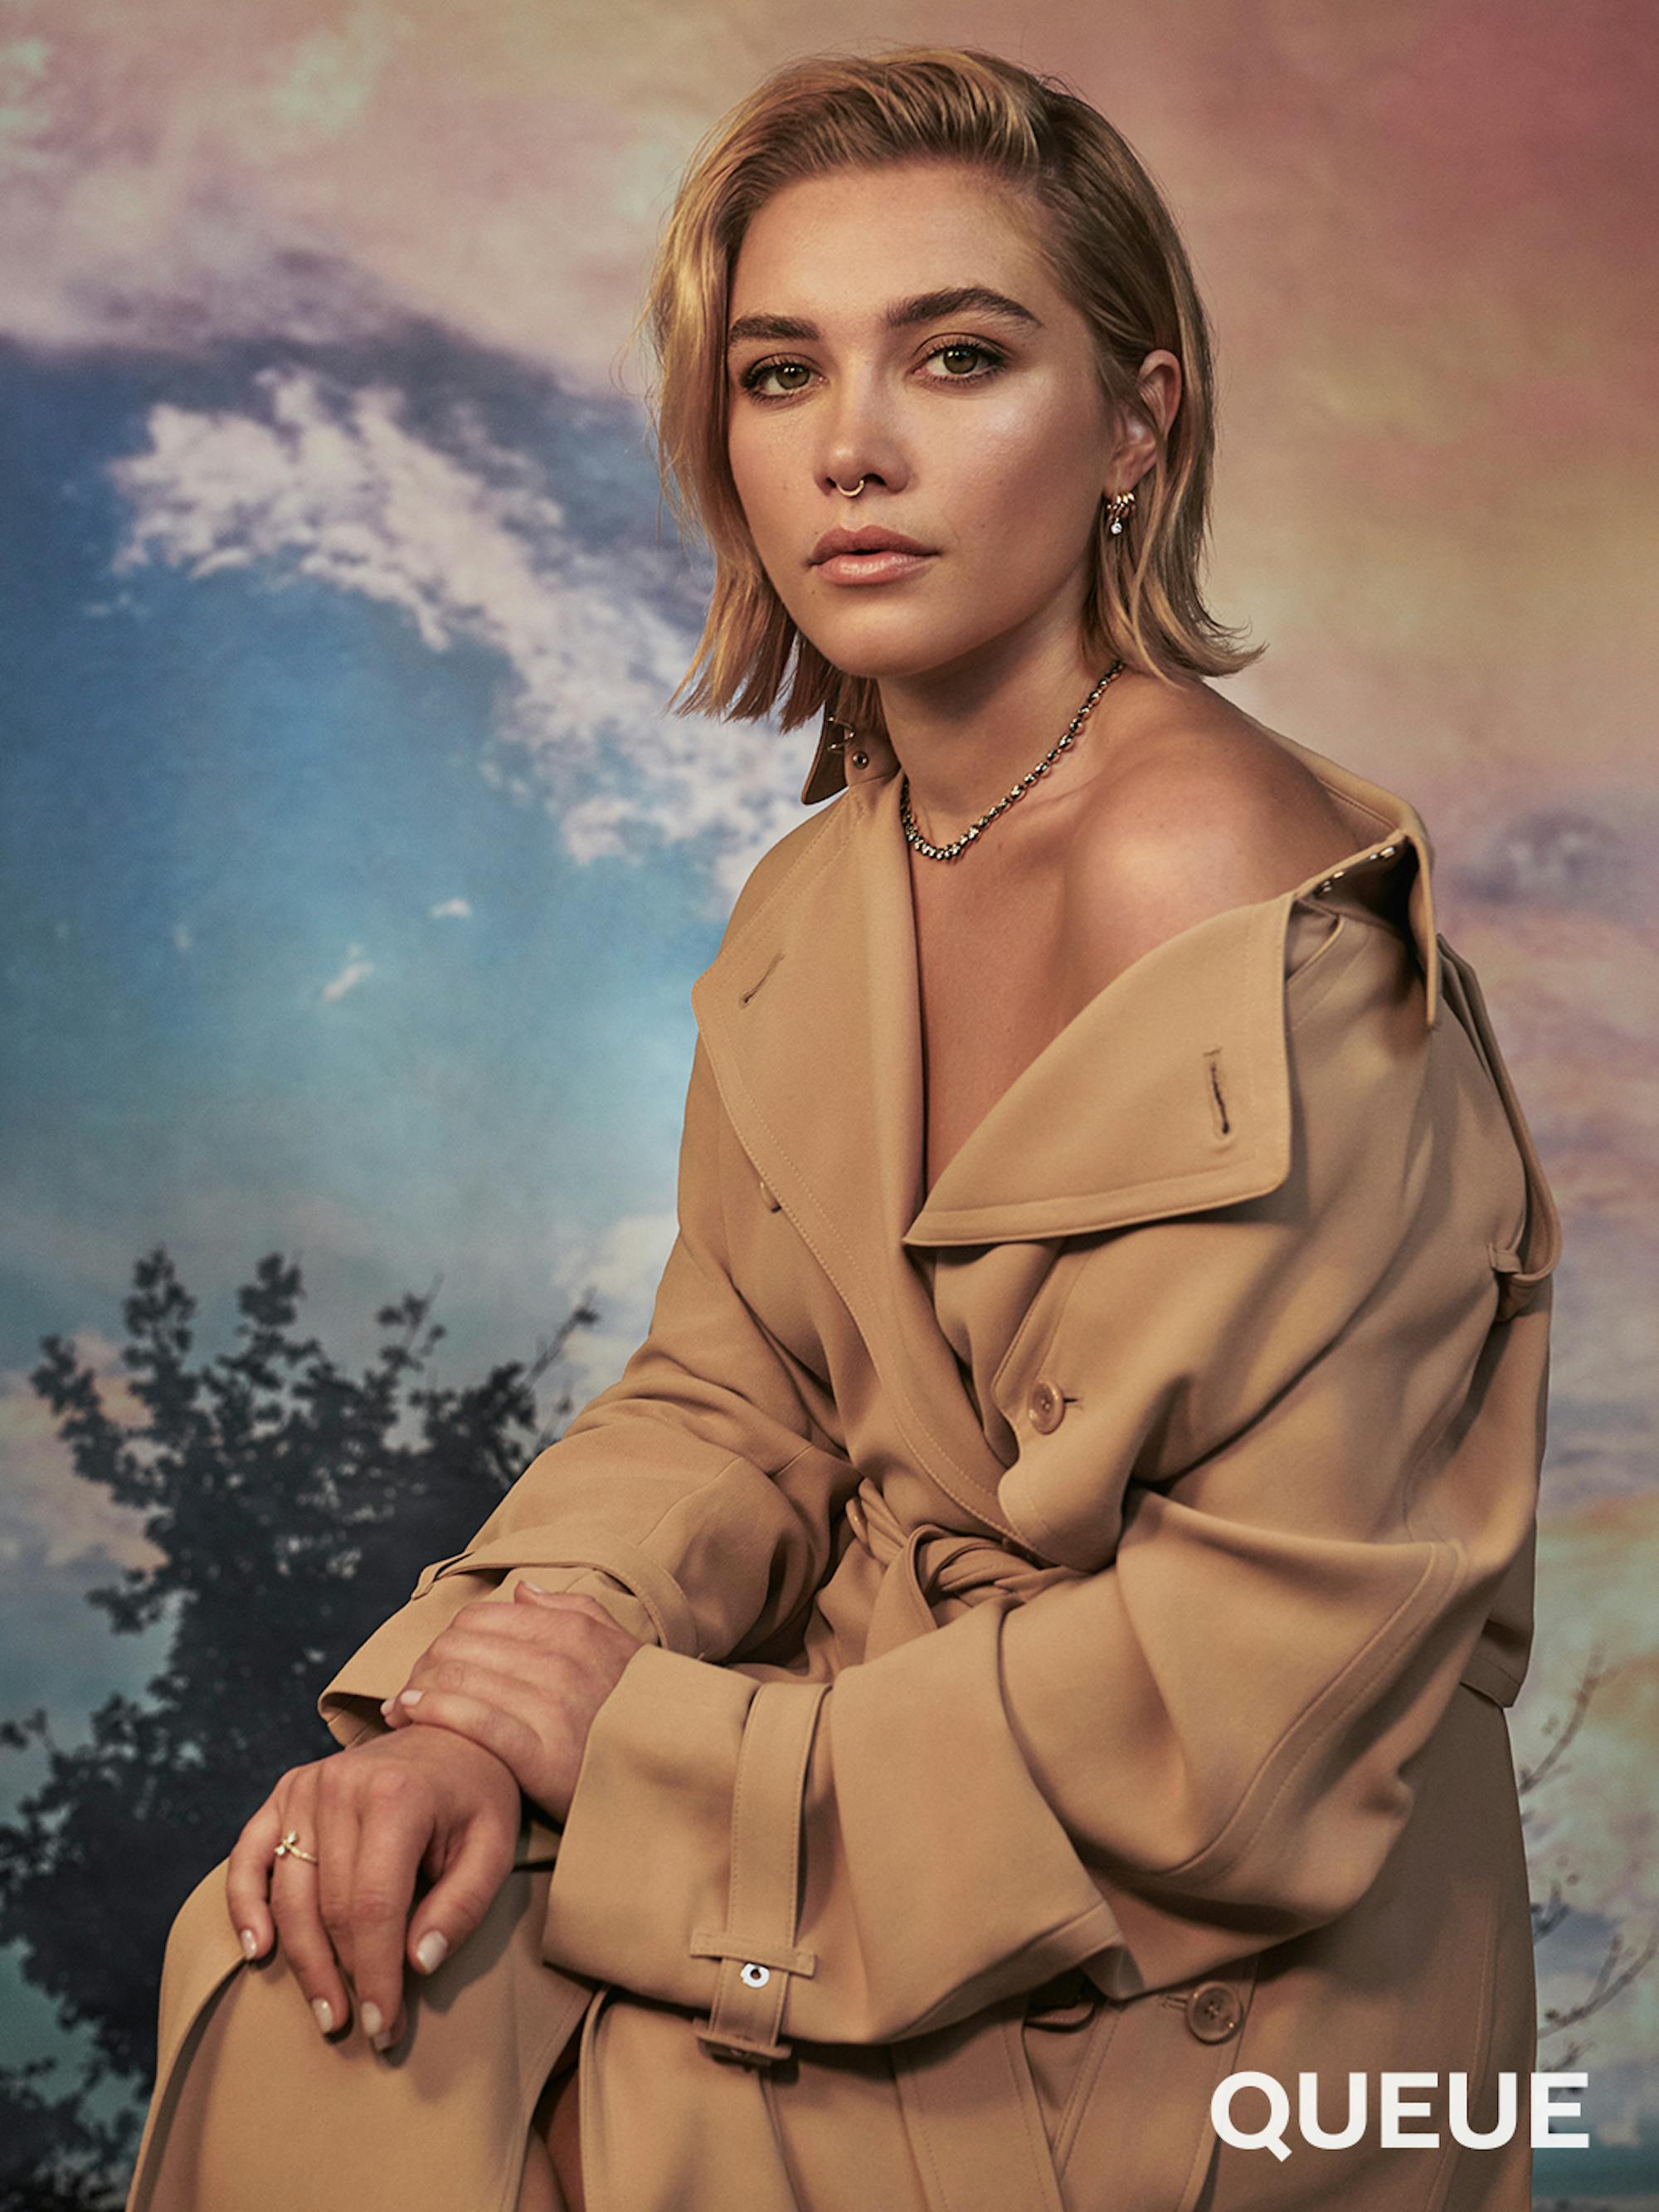 Florence Pugh wears a khaki dress and stands in front of a colorful background.